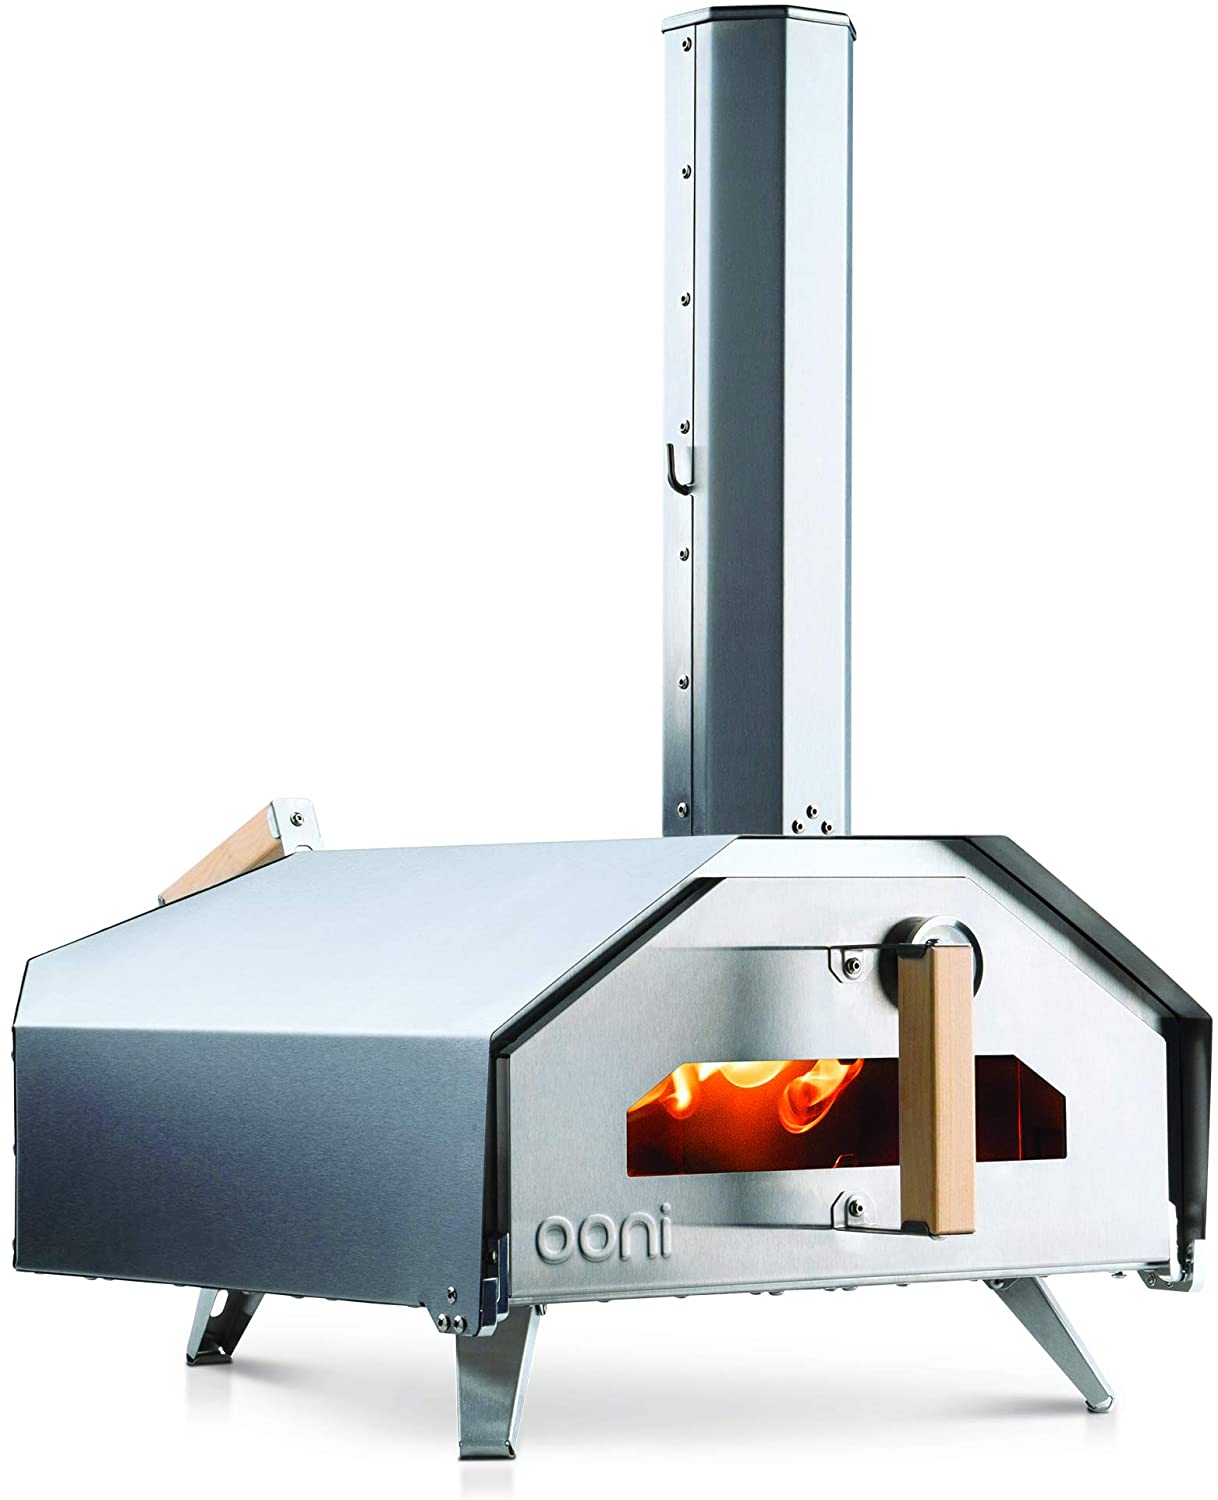 Ooni Pro 16: The BEST Pizza Oven for Unmatched Yard Baking & Grilling